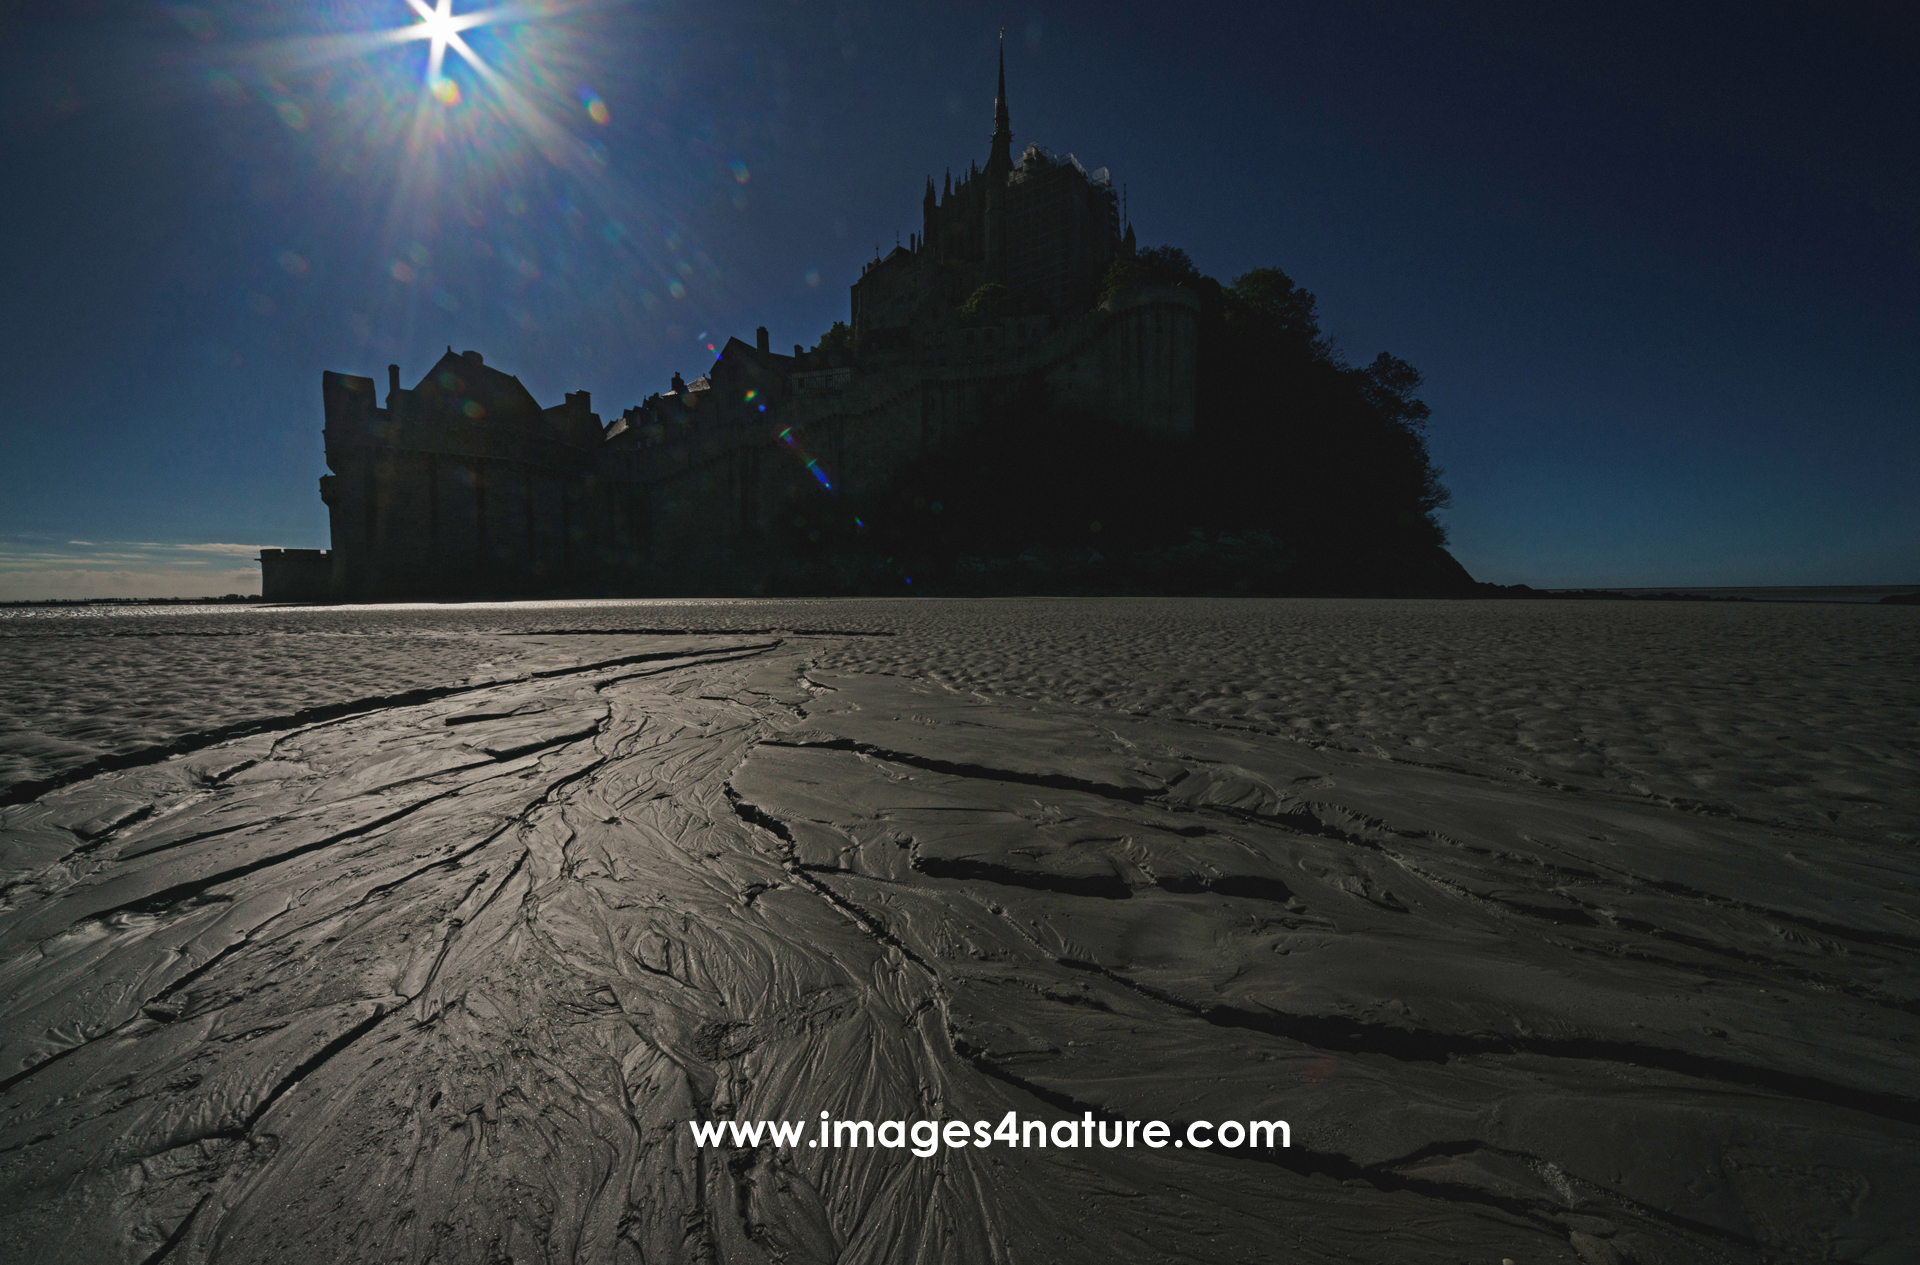 During ebb tide, one can basically walk around the Mont Saint Michel, and admire its' beauty and architecture from all directions  To do something different, I took this image directly into the afternoon sun   France, Mont Saint Michel, October 2022   Image ID 202210 FR 27